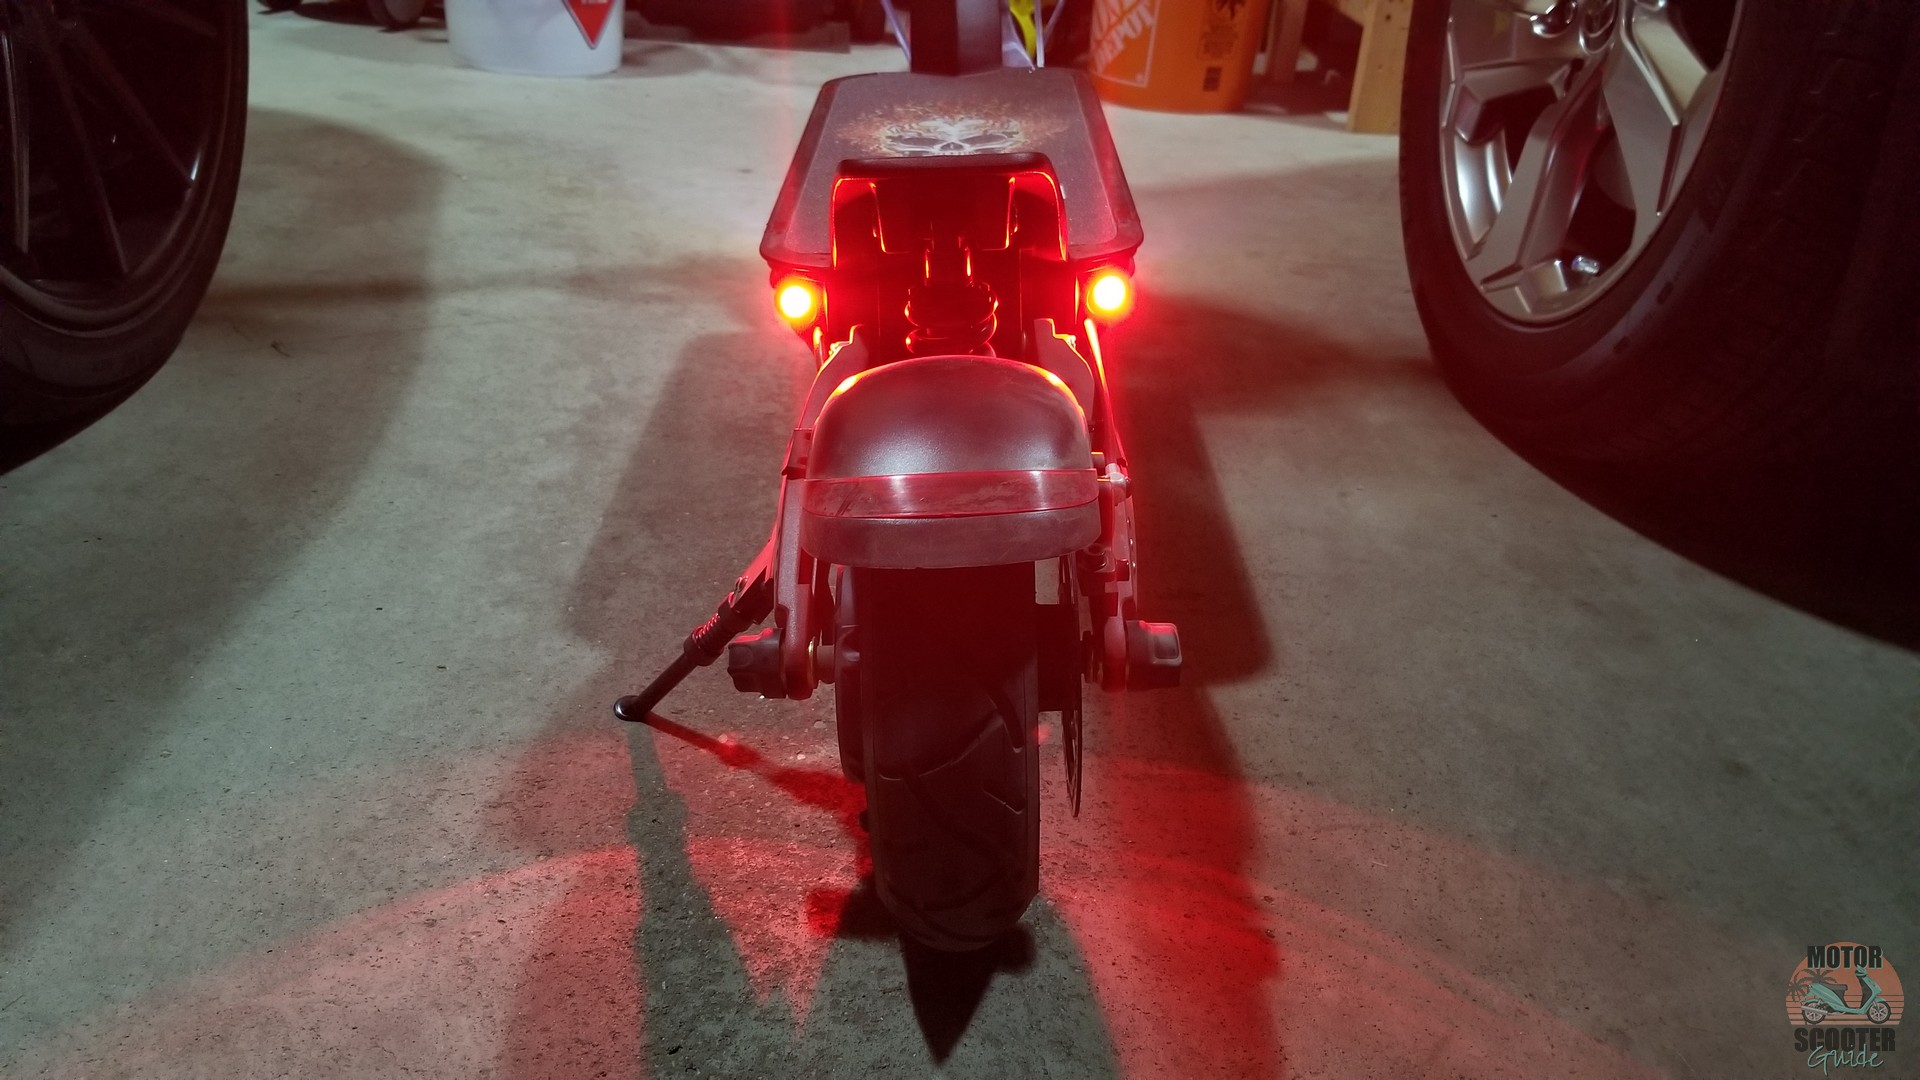 Red LED tail lights on the Varla Eagle One scooter